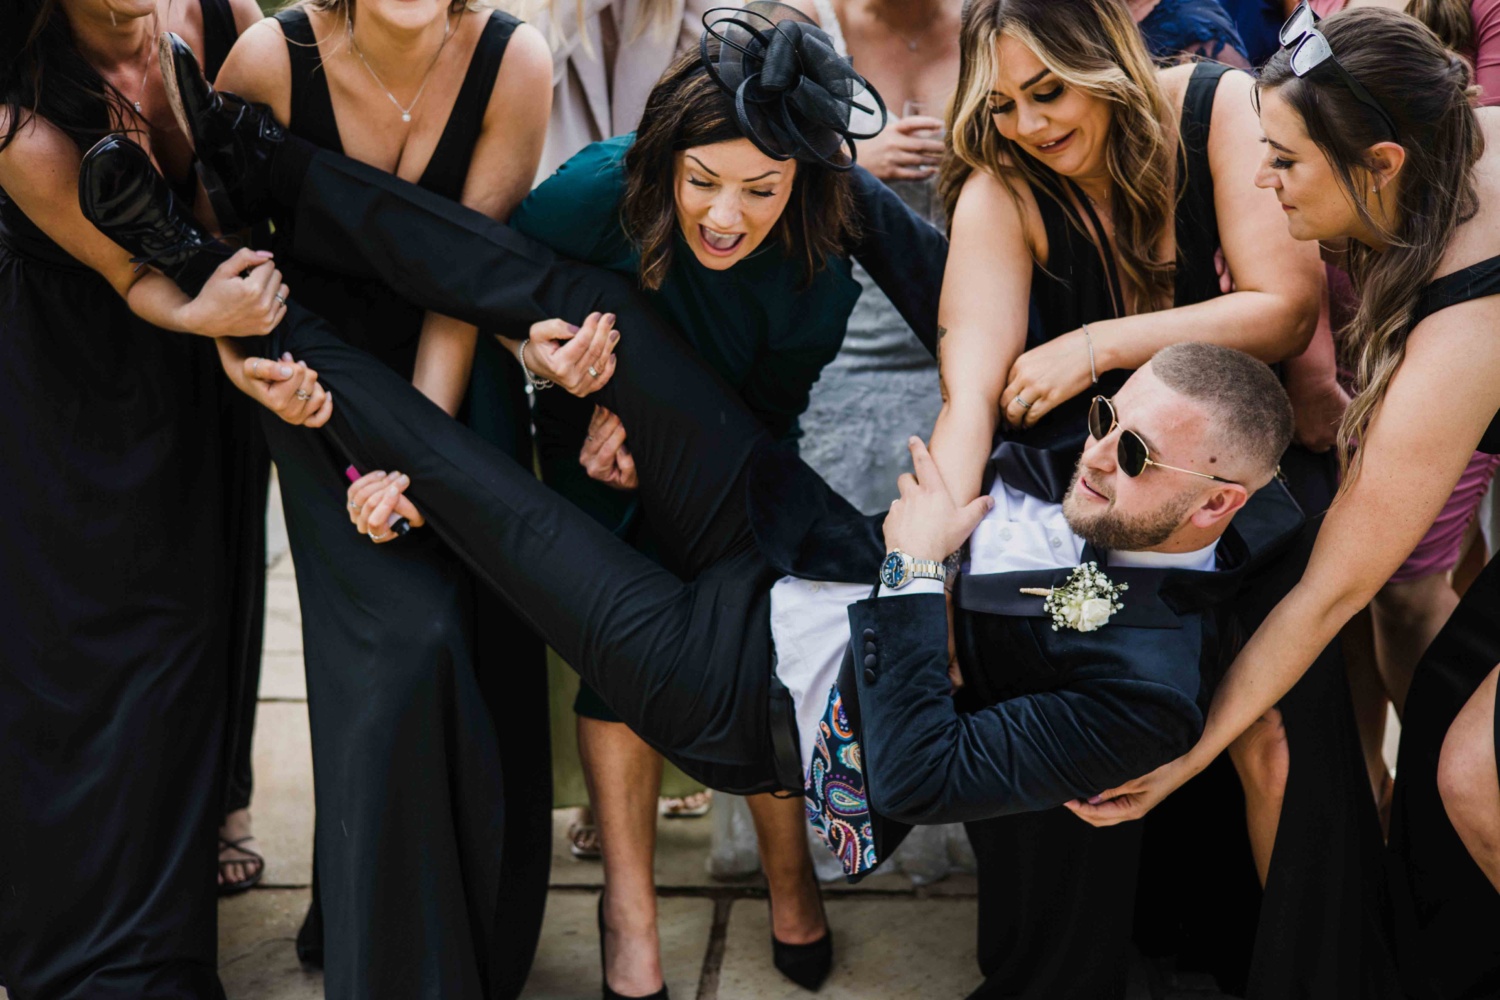 Women attempting to lift the groom in a playful moment.